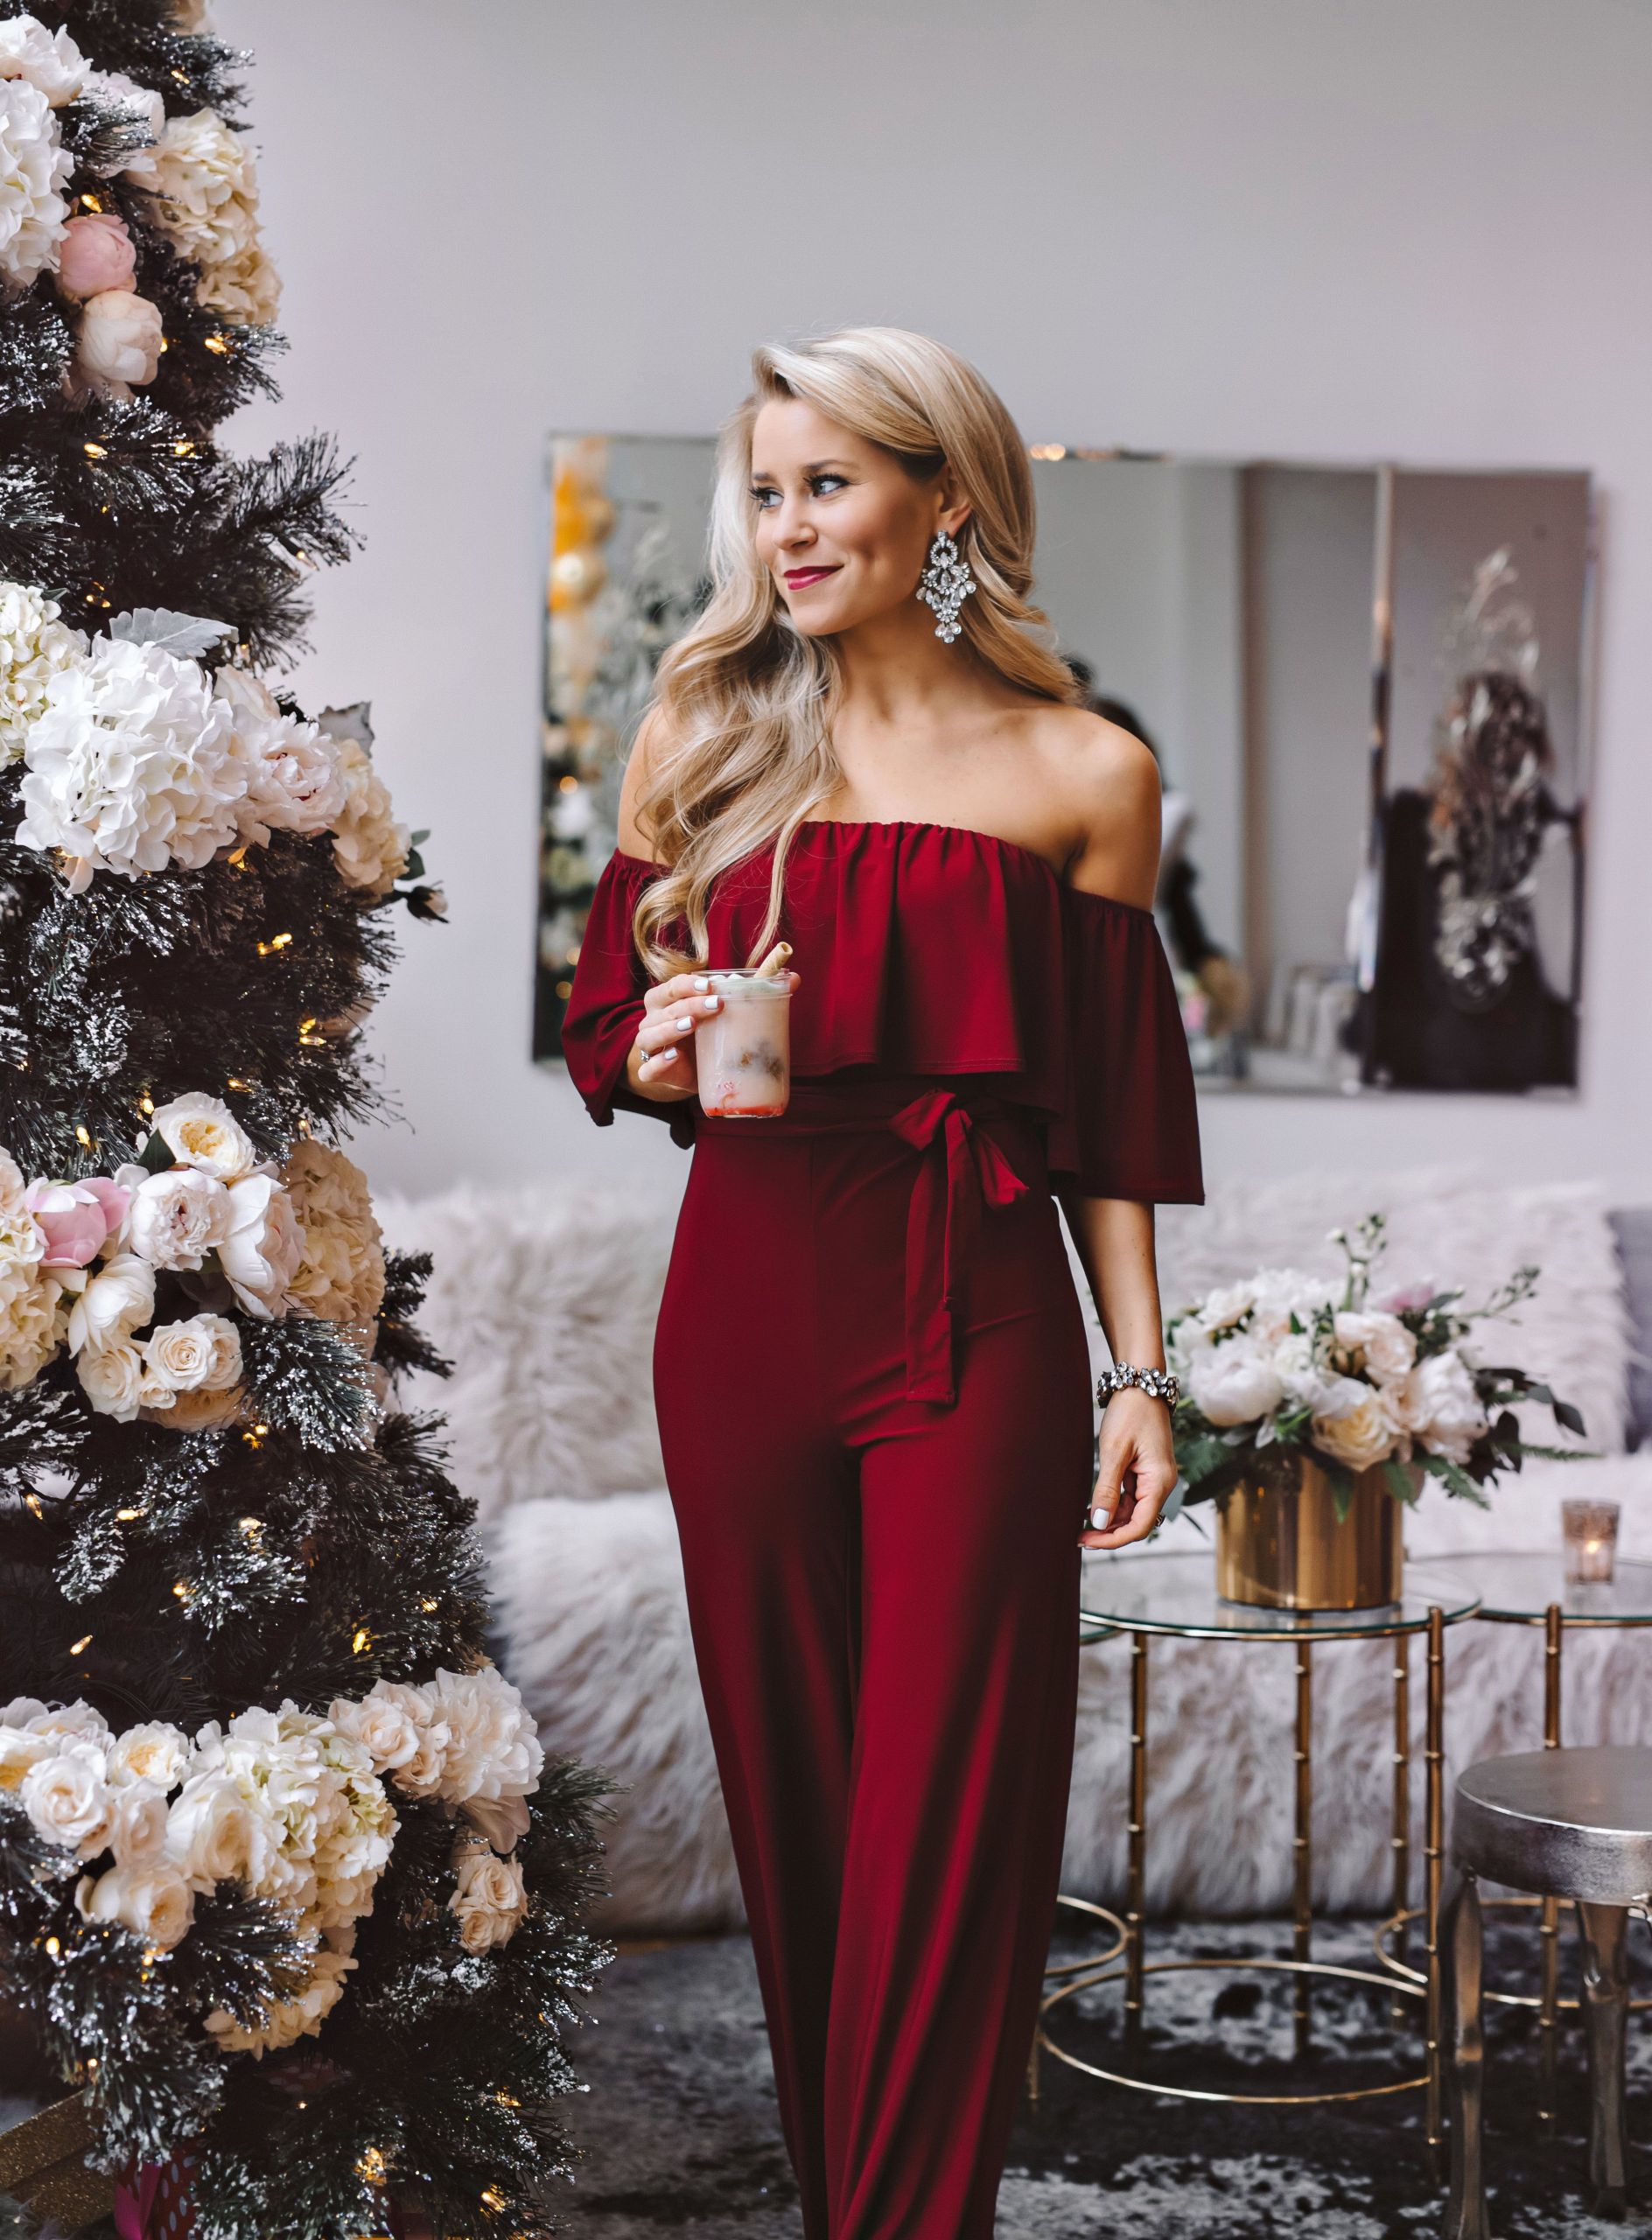 Dinner Party Dress Ideas
 Holiday Party Decor Outfit Ideas